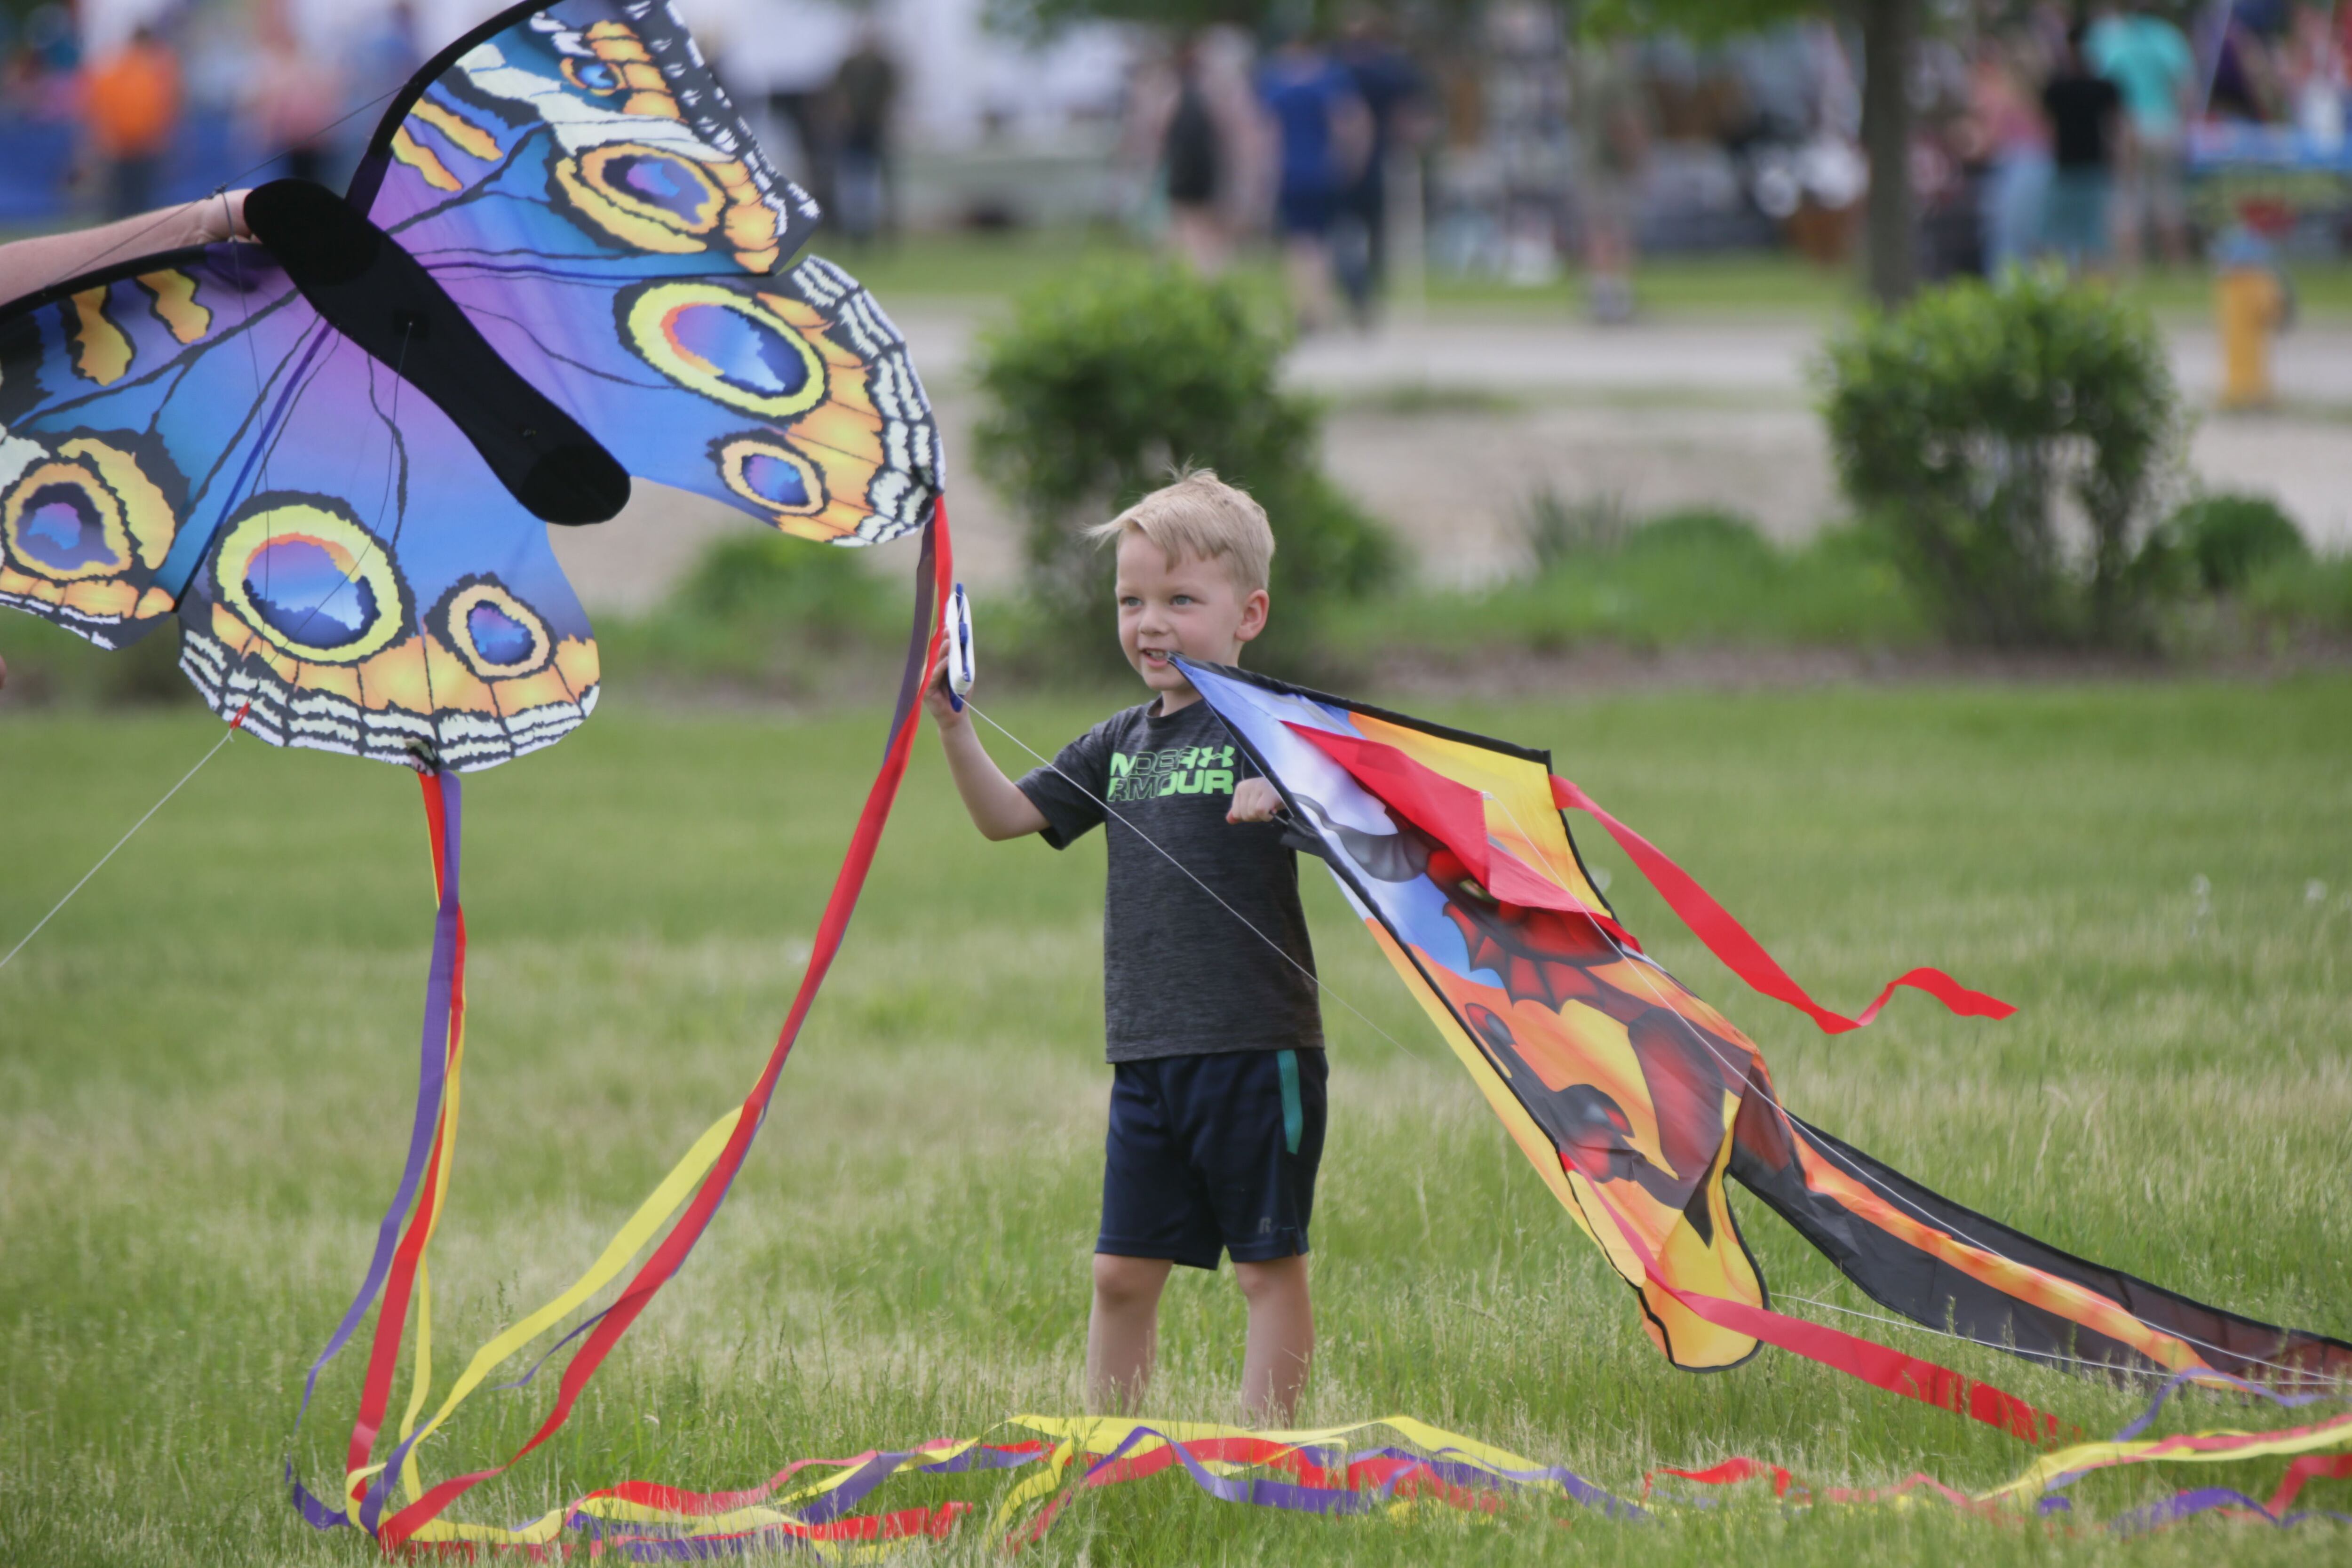 Hunter Govero of Ottawa, holds two kites as he gets ready to fly them during the 'Kites in Flight' festival on Sunday, May 15, 2022 at Heritage Harbor in Ottawa.